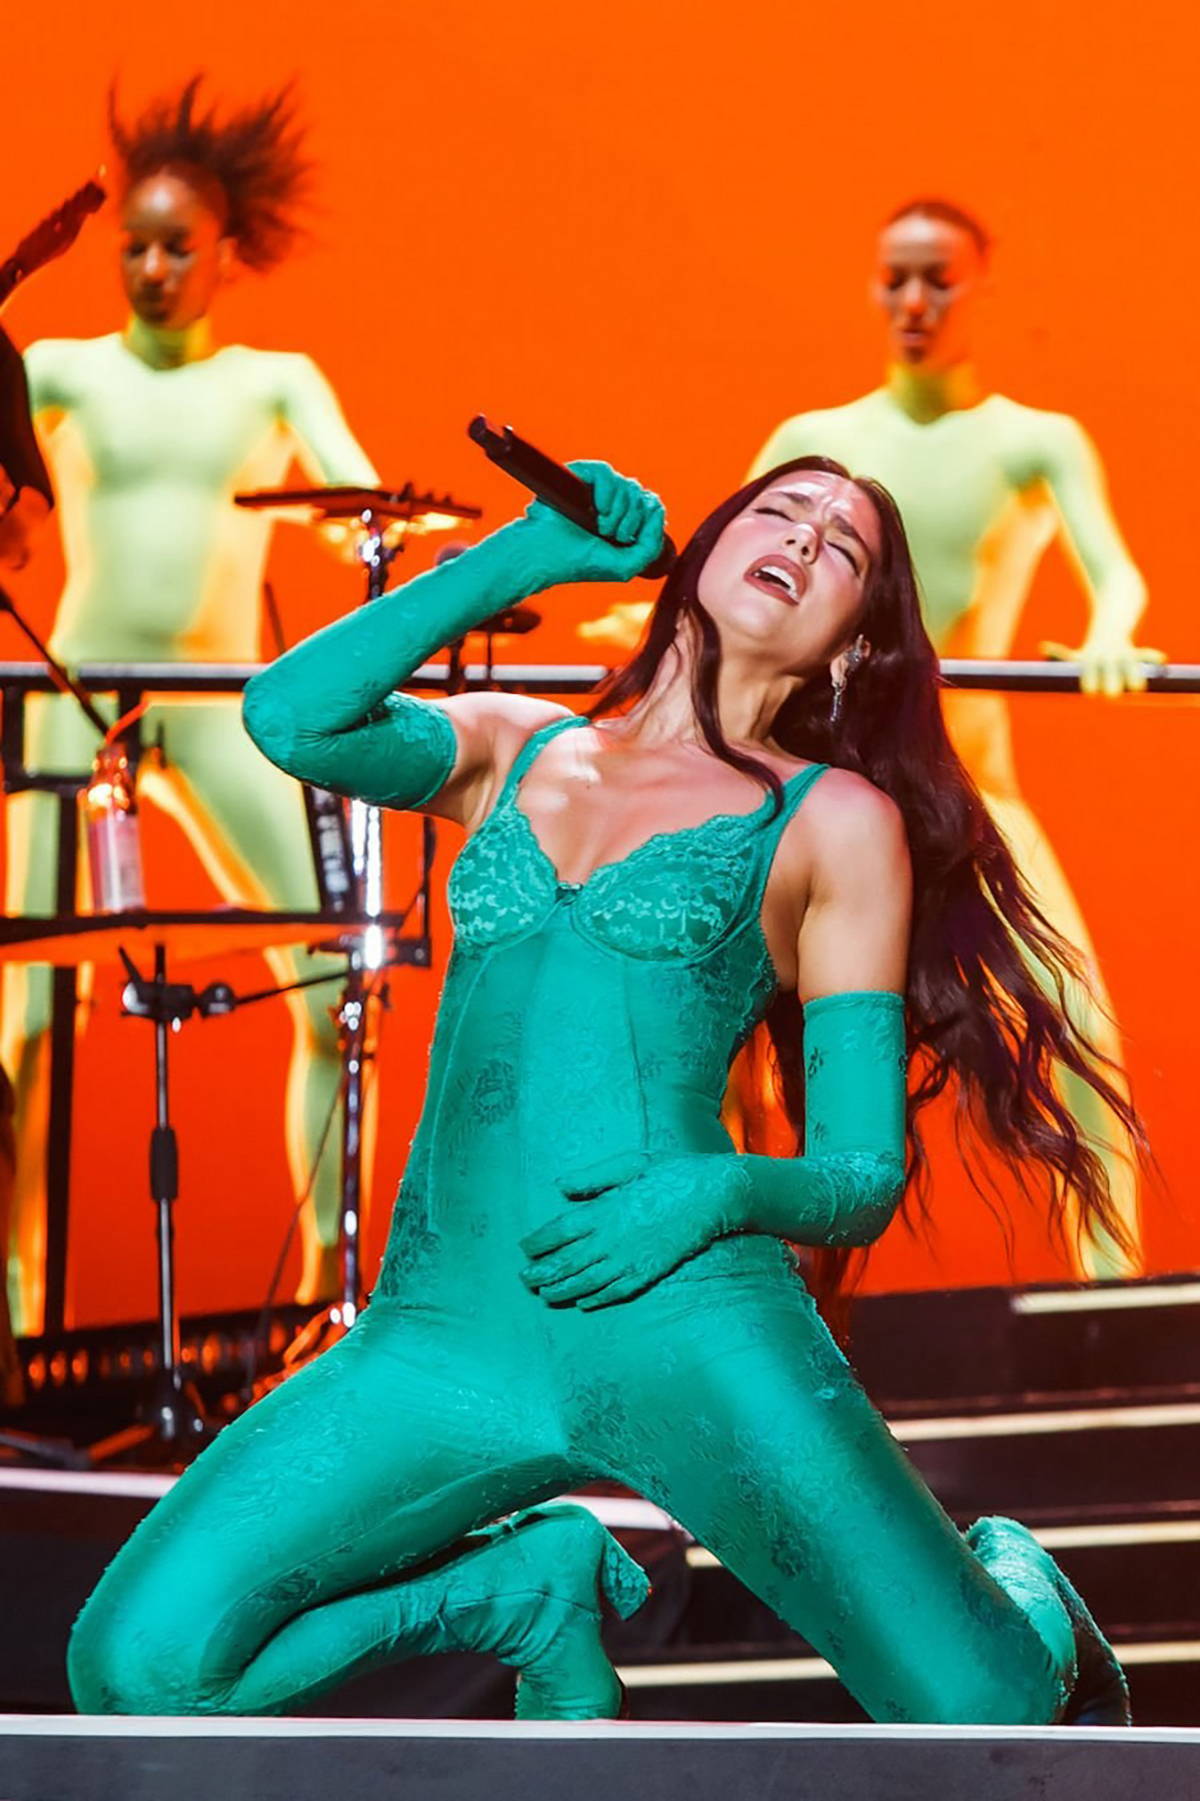 Dua Lipa performs live onstage during her 'Future Nostalgia' Tour in